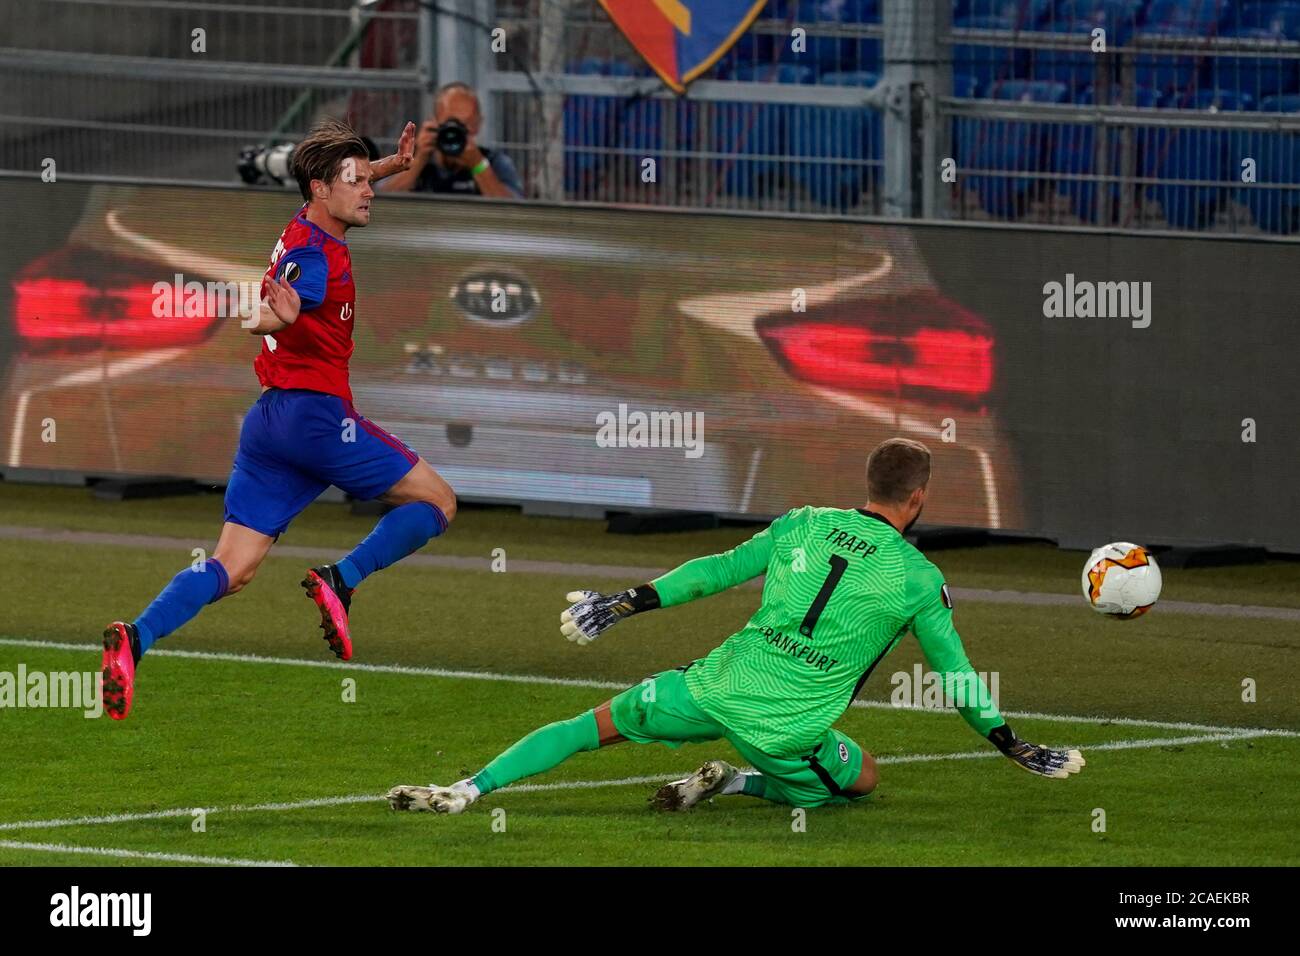 Captain Valentin Stocker of FC Basel in action during the Super League  football match between FC Basel 1893 and FC Zuerich. Daniela Porcelli/SPP  Stock Photo - Alamy